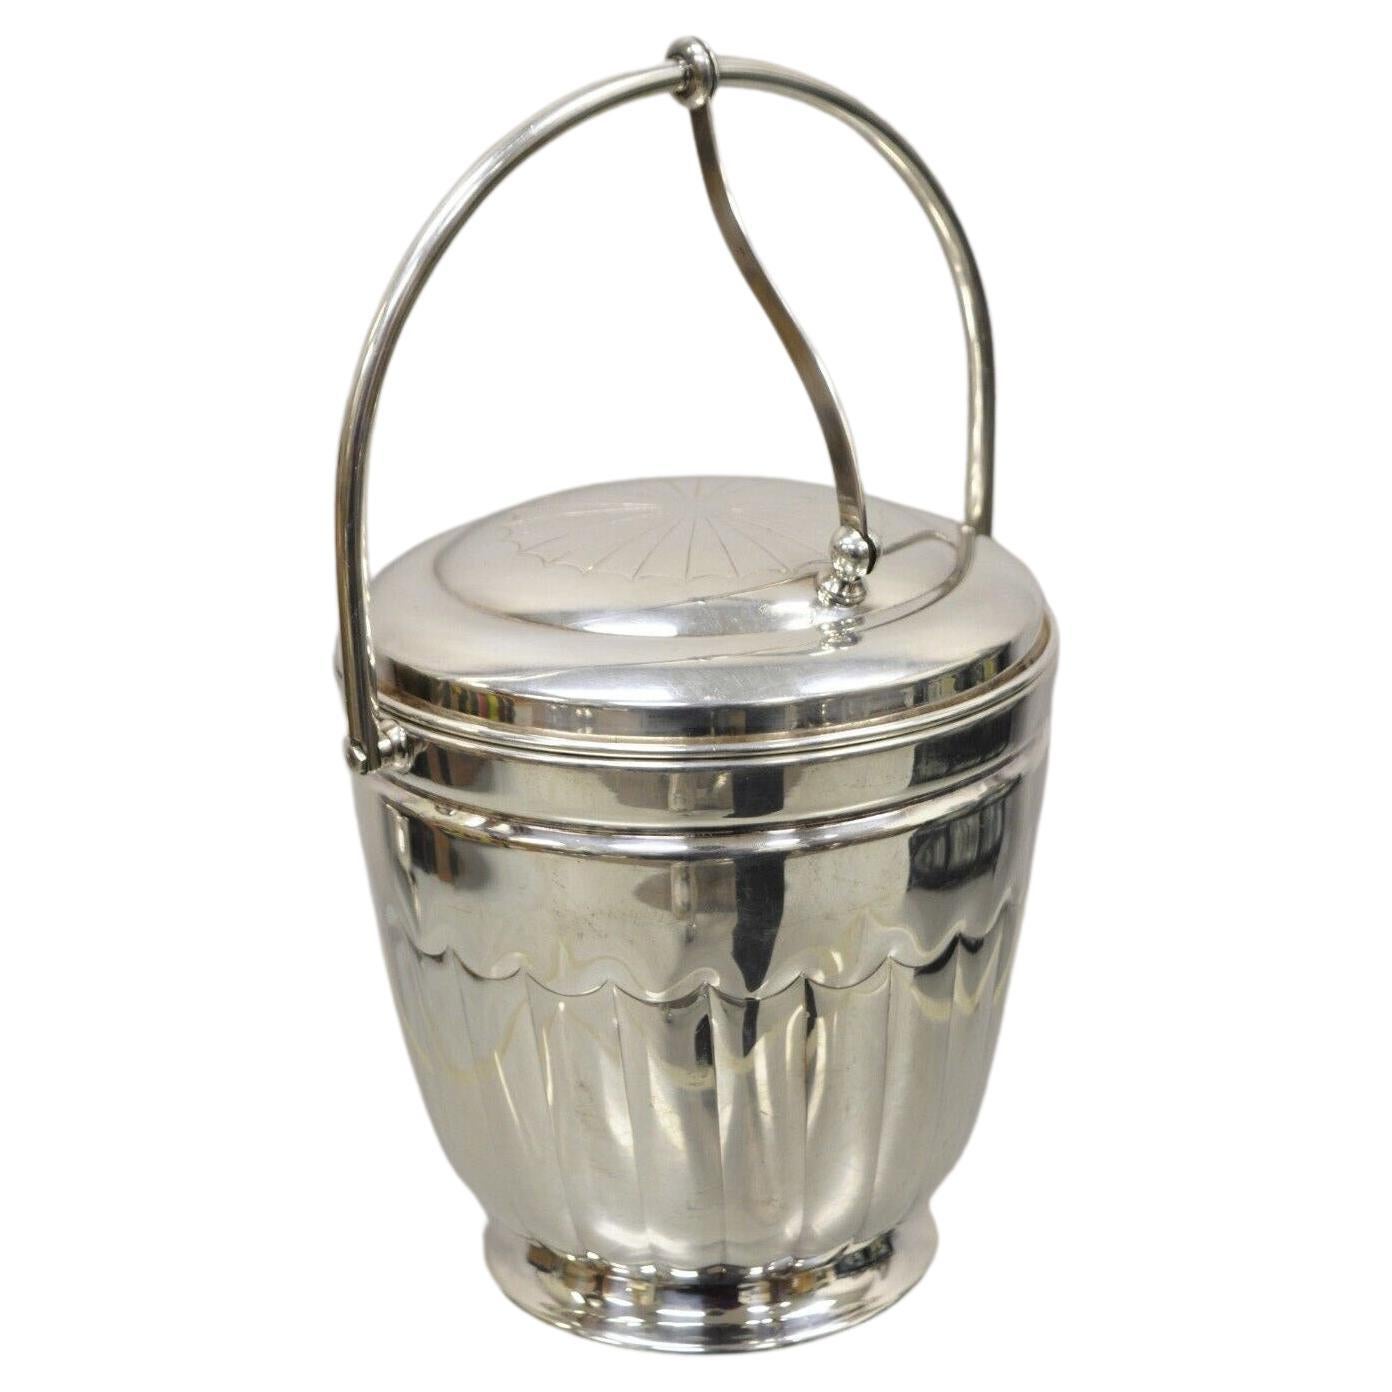 Antique English Regency Silver Plate Ice Bucket w/ Reticulating Hinge Lid Handle For Sale